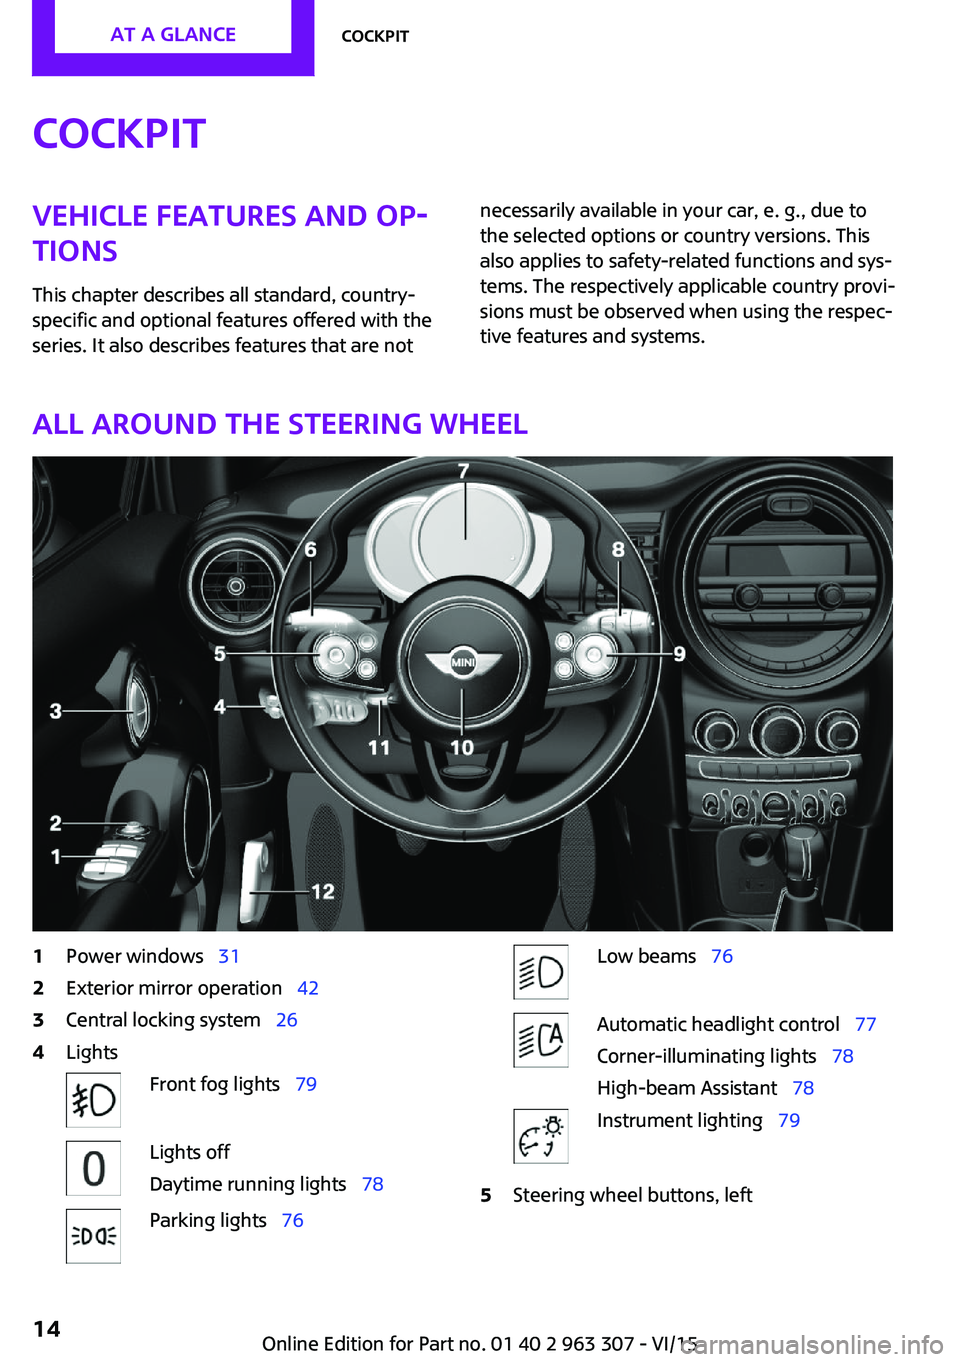 MINI COOPER 2016  Owners Manual CockpitVehicle features and op‐
tions
This chapter describes all standard, country-
specific and optional features offered with the
series. It also describes features that are notnecessarily availab